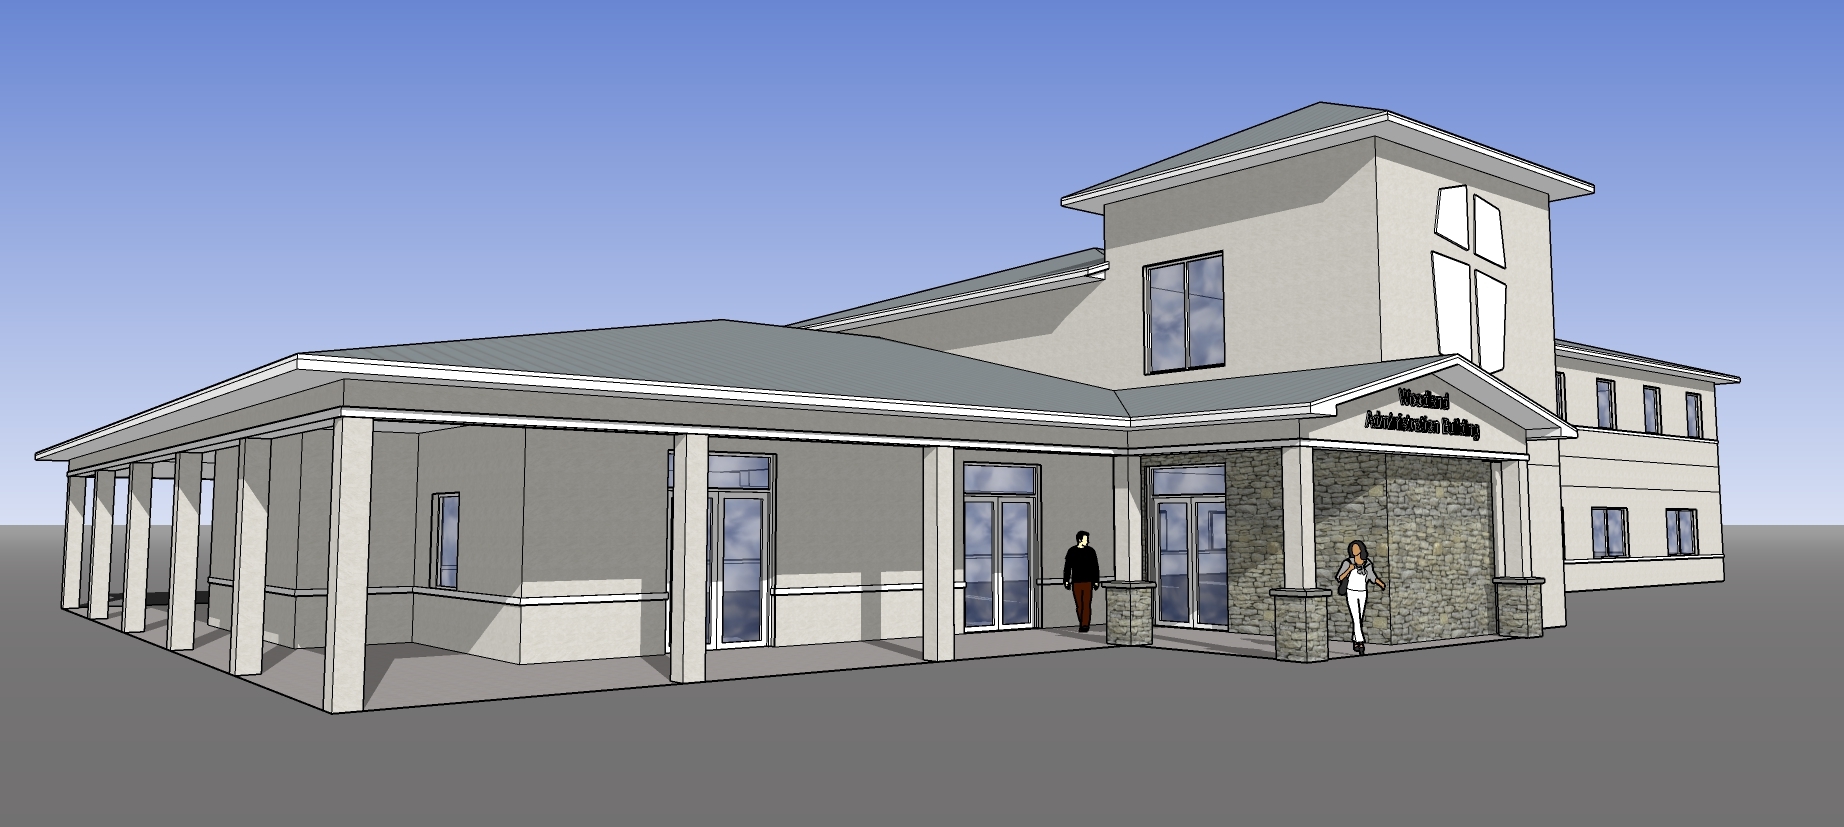 The new school also will house church administrative offices. Courtesy rendering.